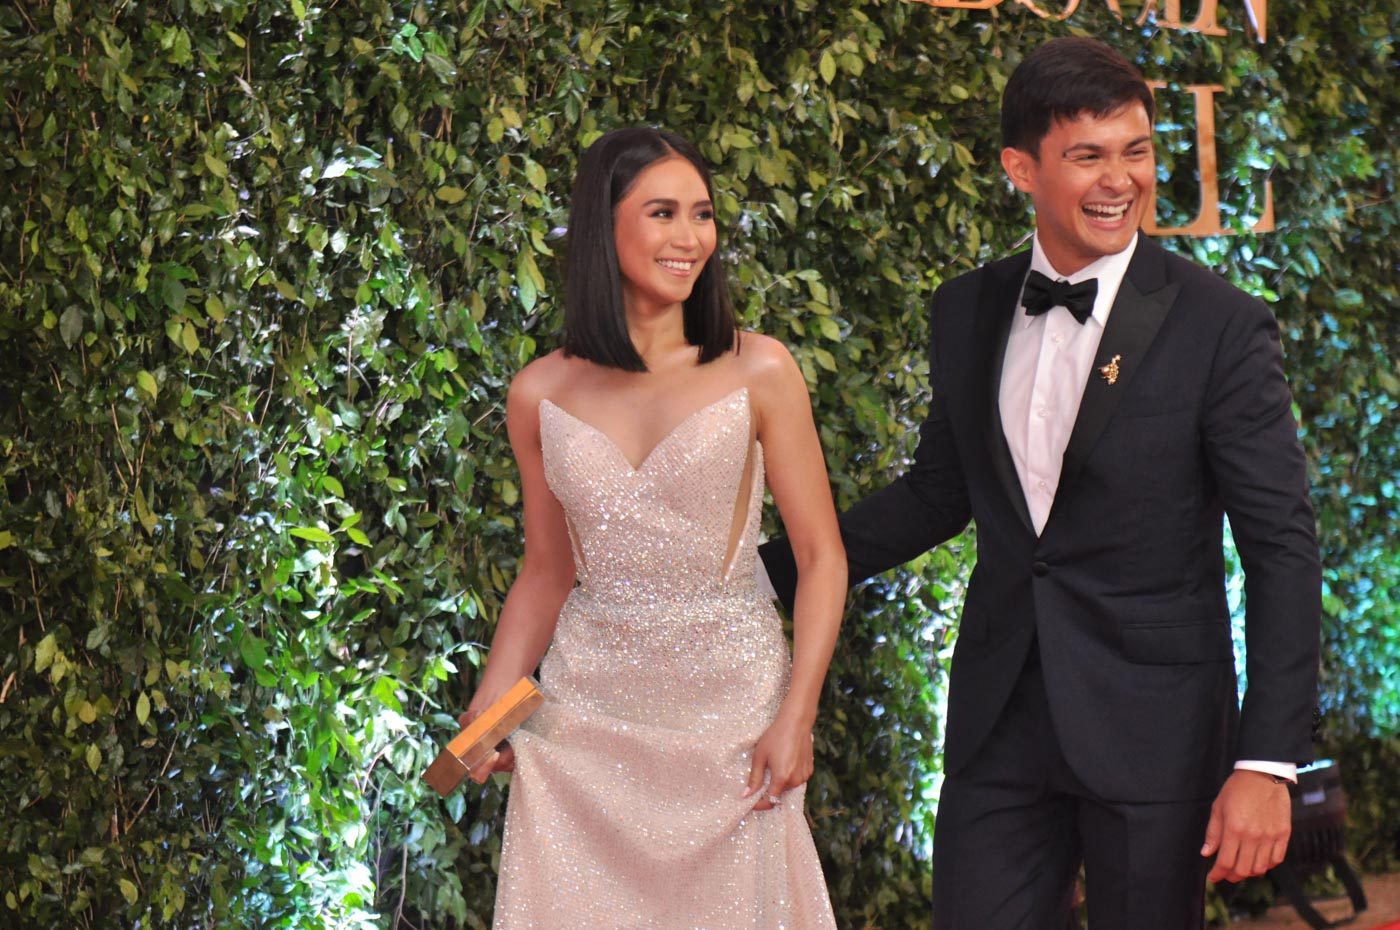 Matteo Guidicelli on ABS-CBN Ball 2018 with Sarah Geronimo: ‘This one was special’